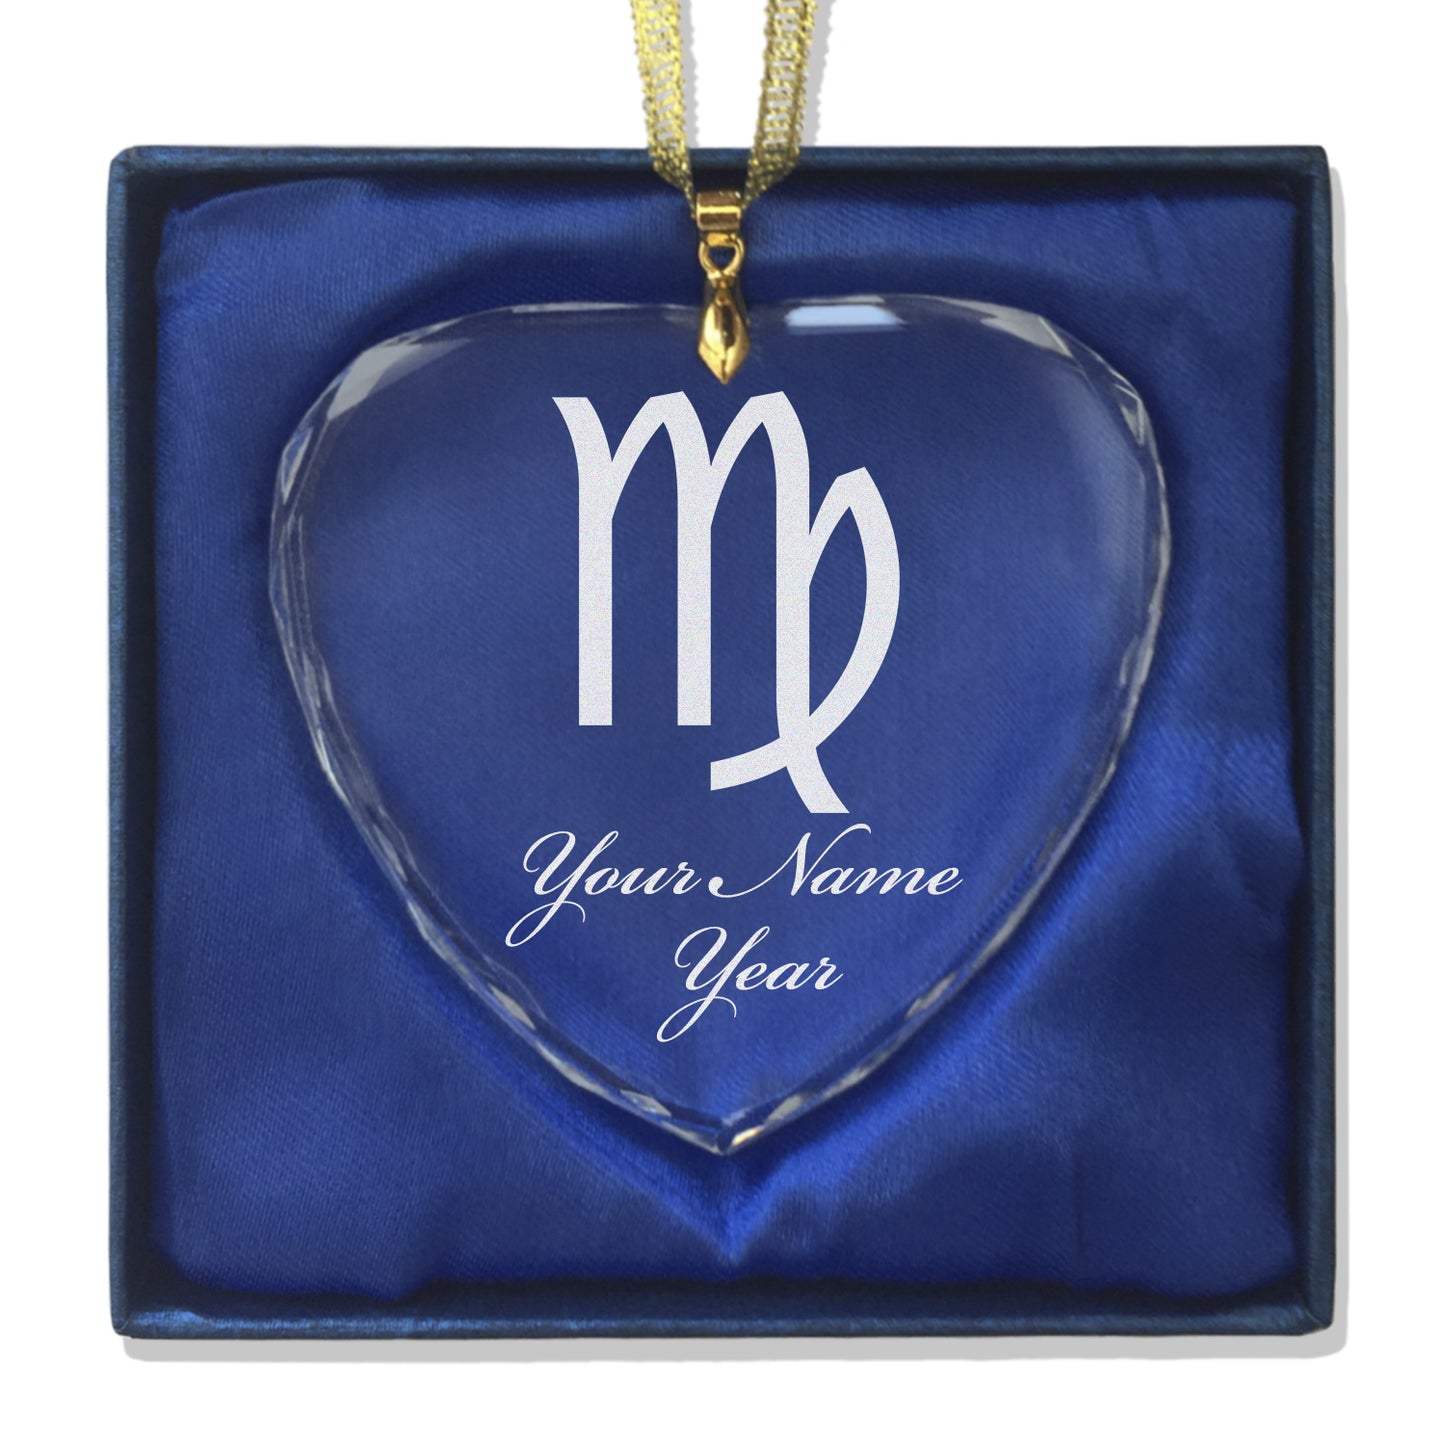 LaserGram Christmas Ornament, Zodiac Sign Virgo, Personalized Engraving Included (Heart Shape)